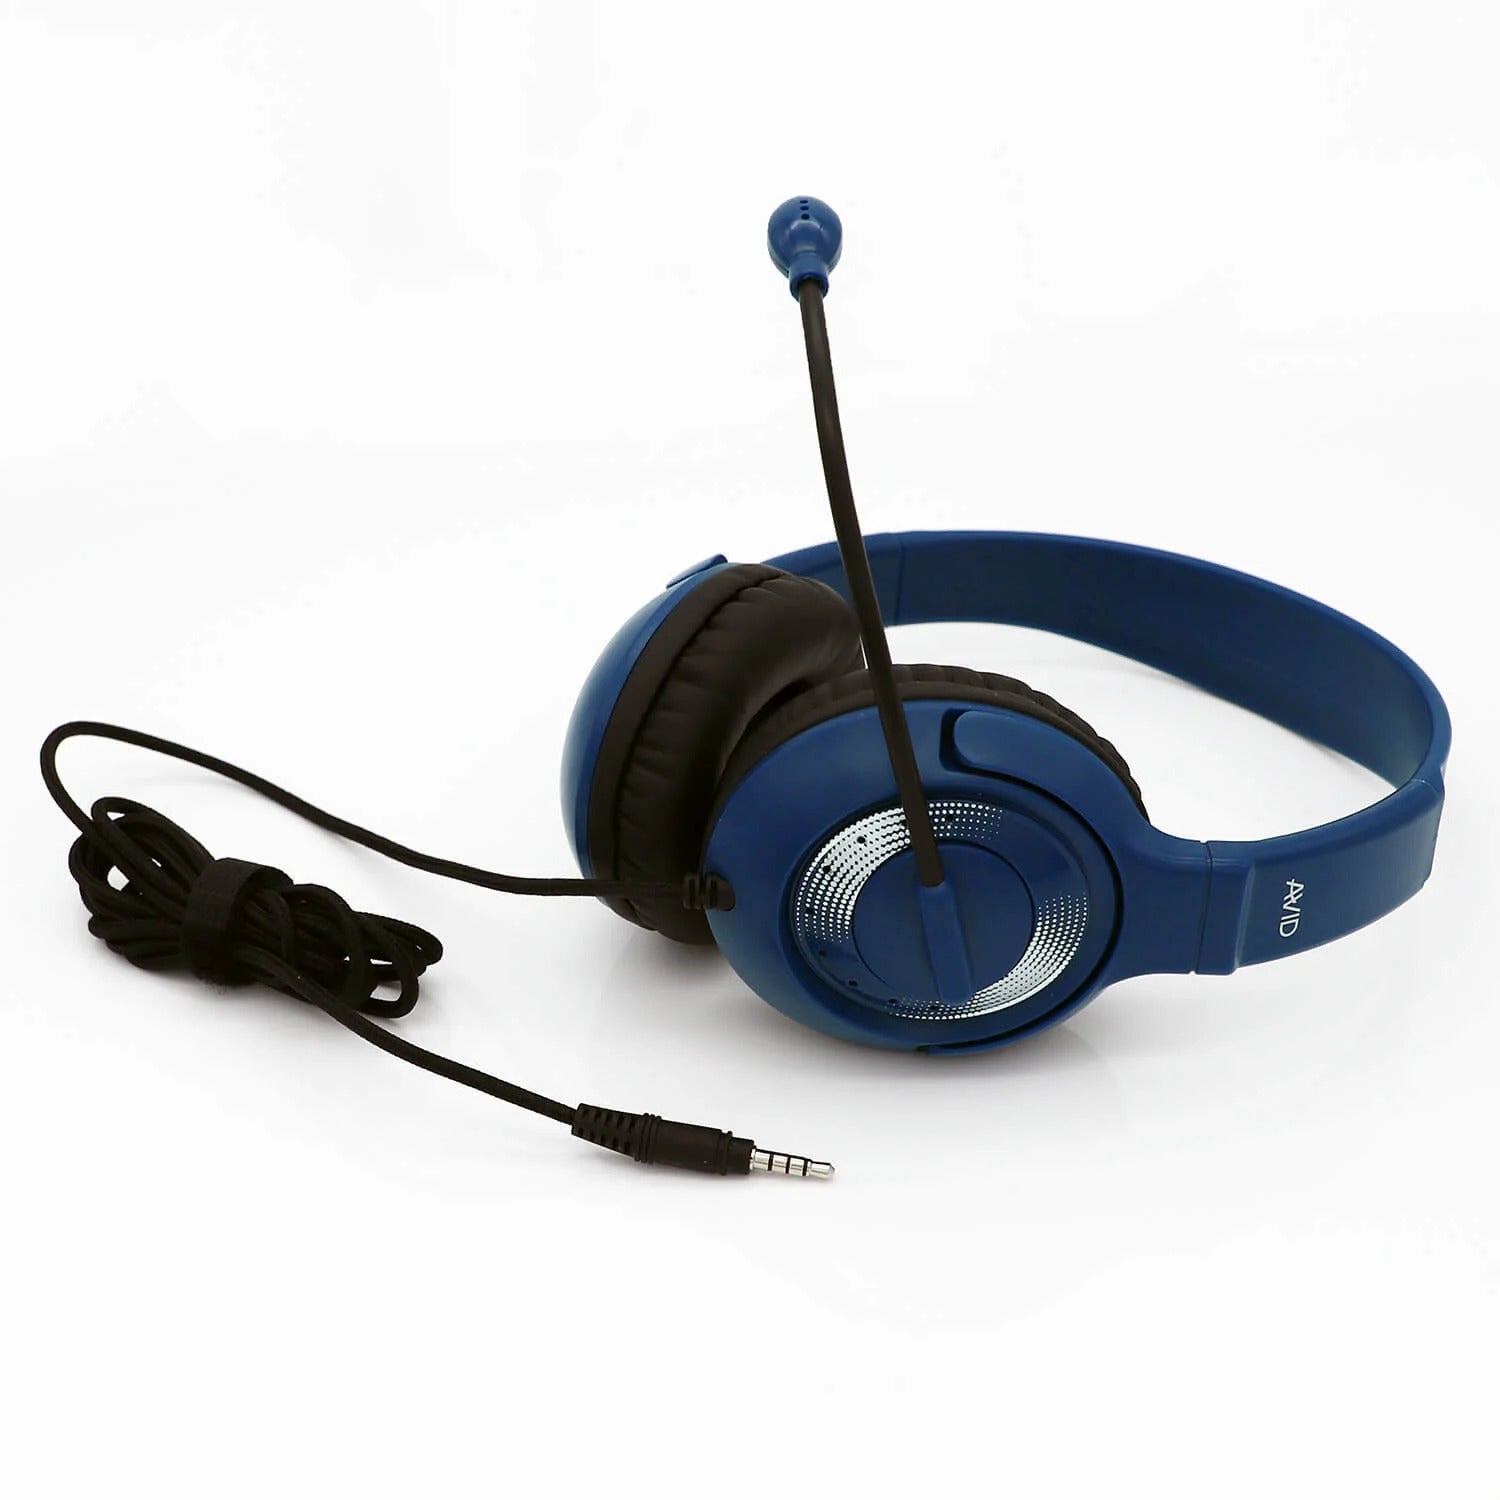 Learning Headphones provides TRRS school headsets at affordable prices. With a variety of headphones and headset types, you're sure to find the right pair for your needs.